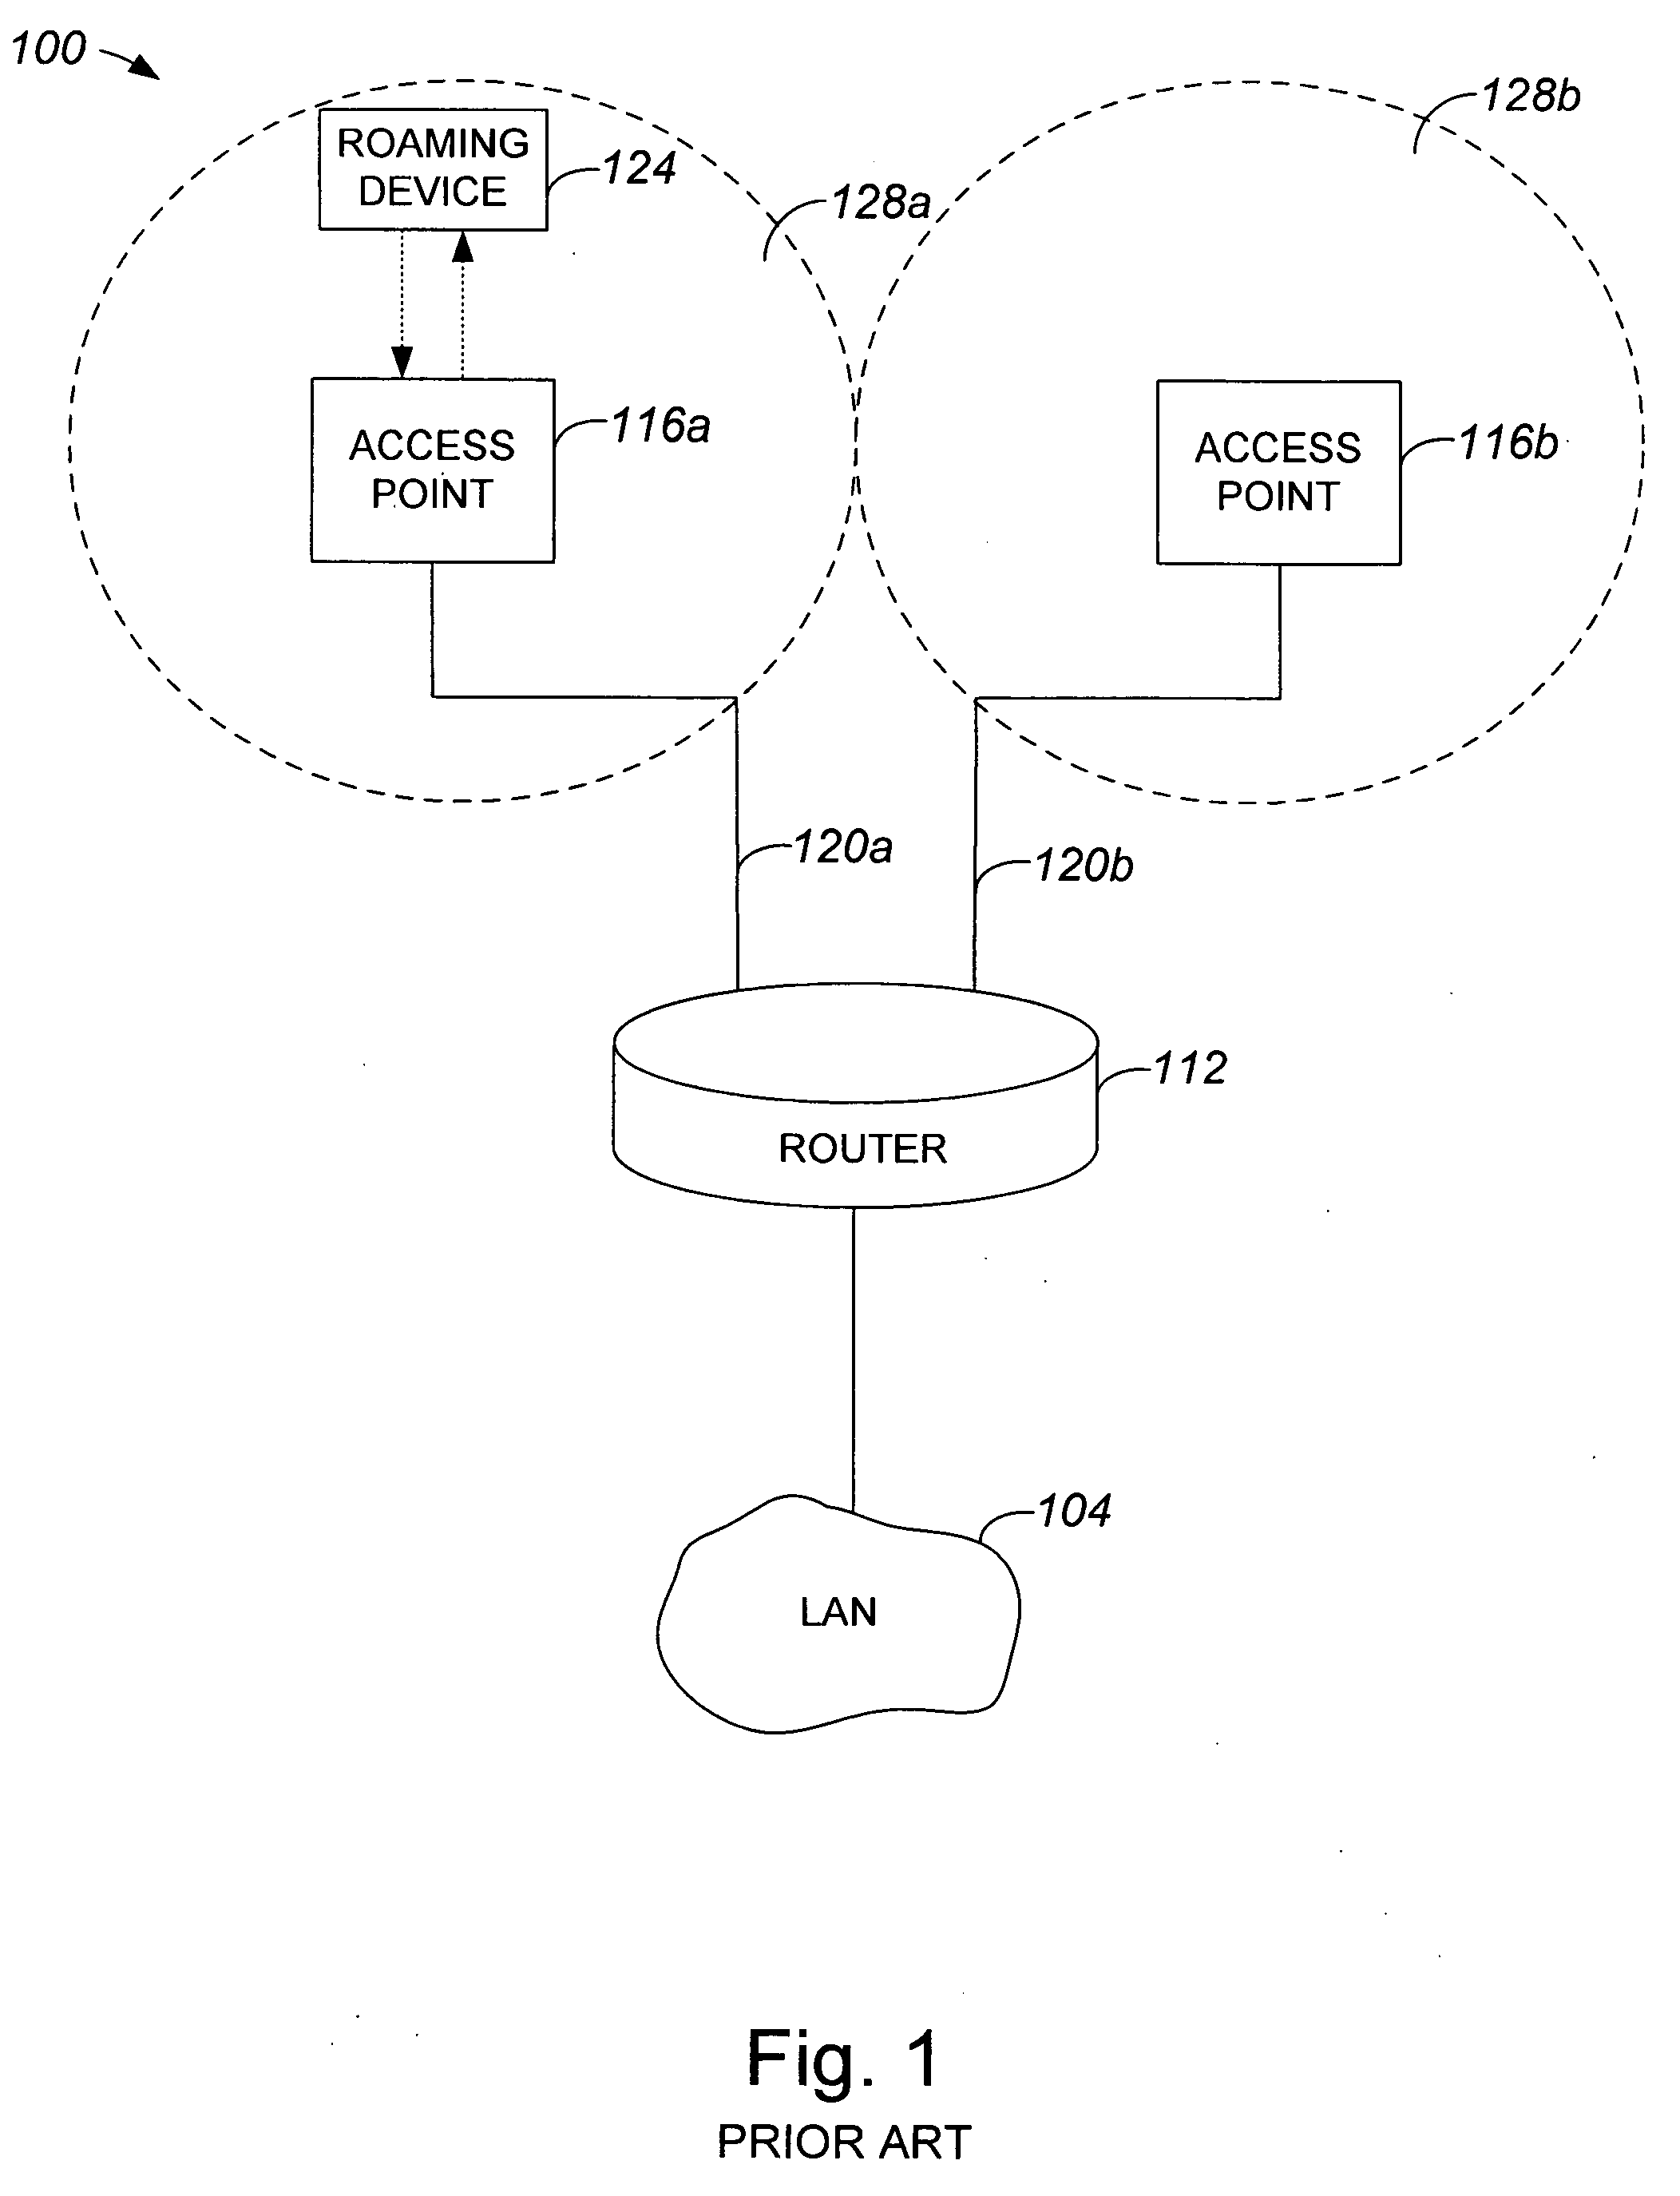 Method and apparatus for adding editable information to records associated with a transceiver device